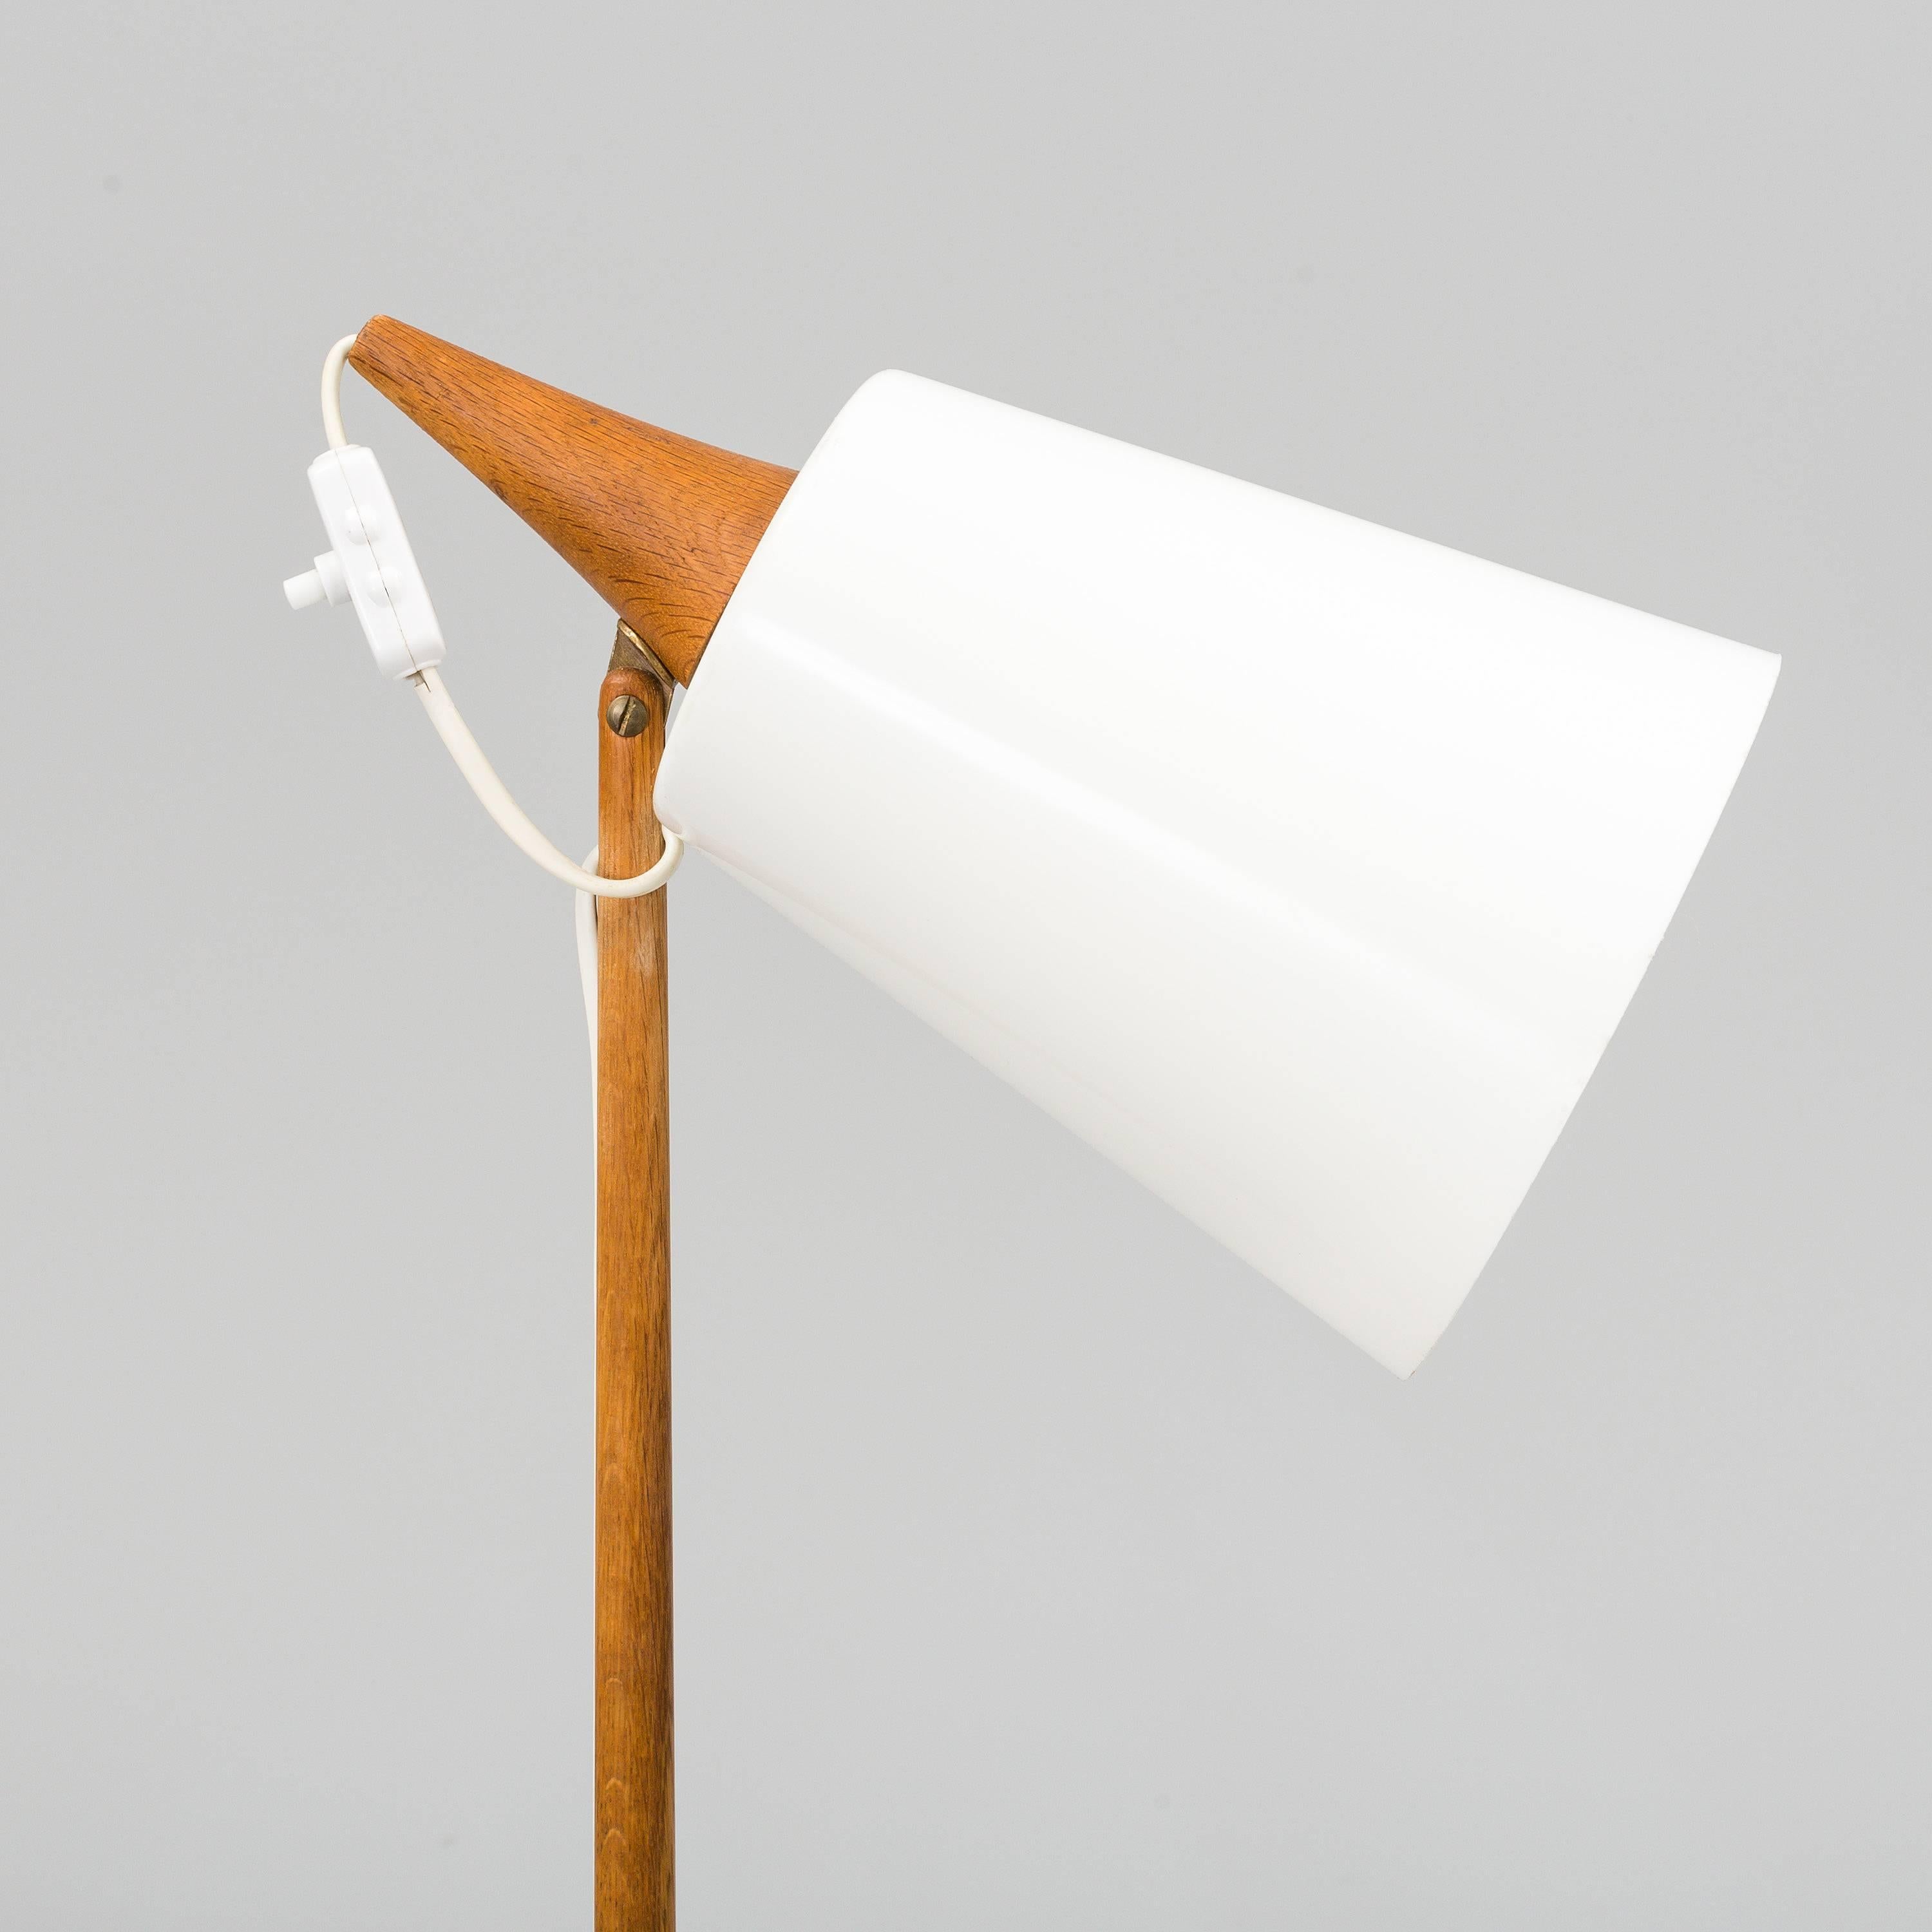 Scandinavian Modern floor lamp by Uno & Osten Kristiansson for Luxus, manufactured in Sweden in 1960s. Natural oak and white acrylic orientable shade. Signed in the bottom.